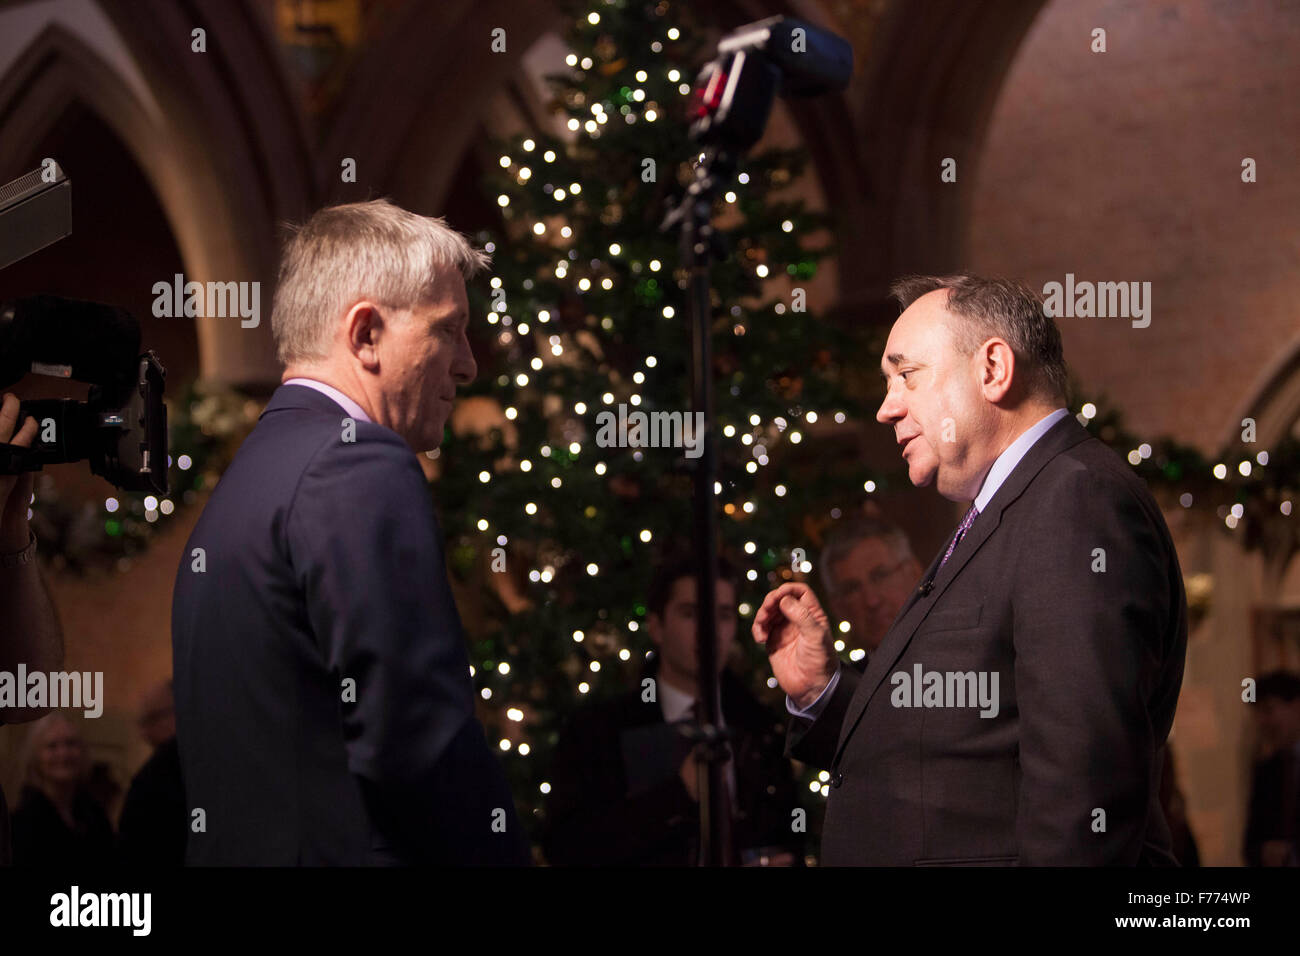 Edinburgh, UK. 26th November, 2015. A portrait of the RT Hon Alex Salmond MP MSP display on show at the Scottish National Portrait Gallery this week. The portrait was part of a group of fourteen works painted by Gerard M Burns. Pictured member of the media and Alex Salmond. Pako Mera/Alamy Live News. Stock Photo